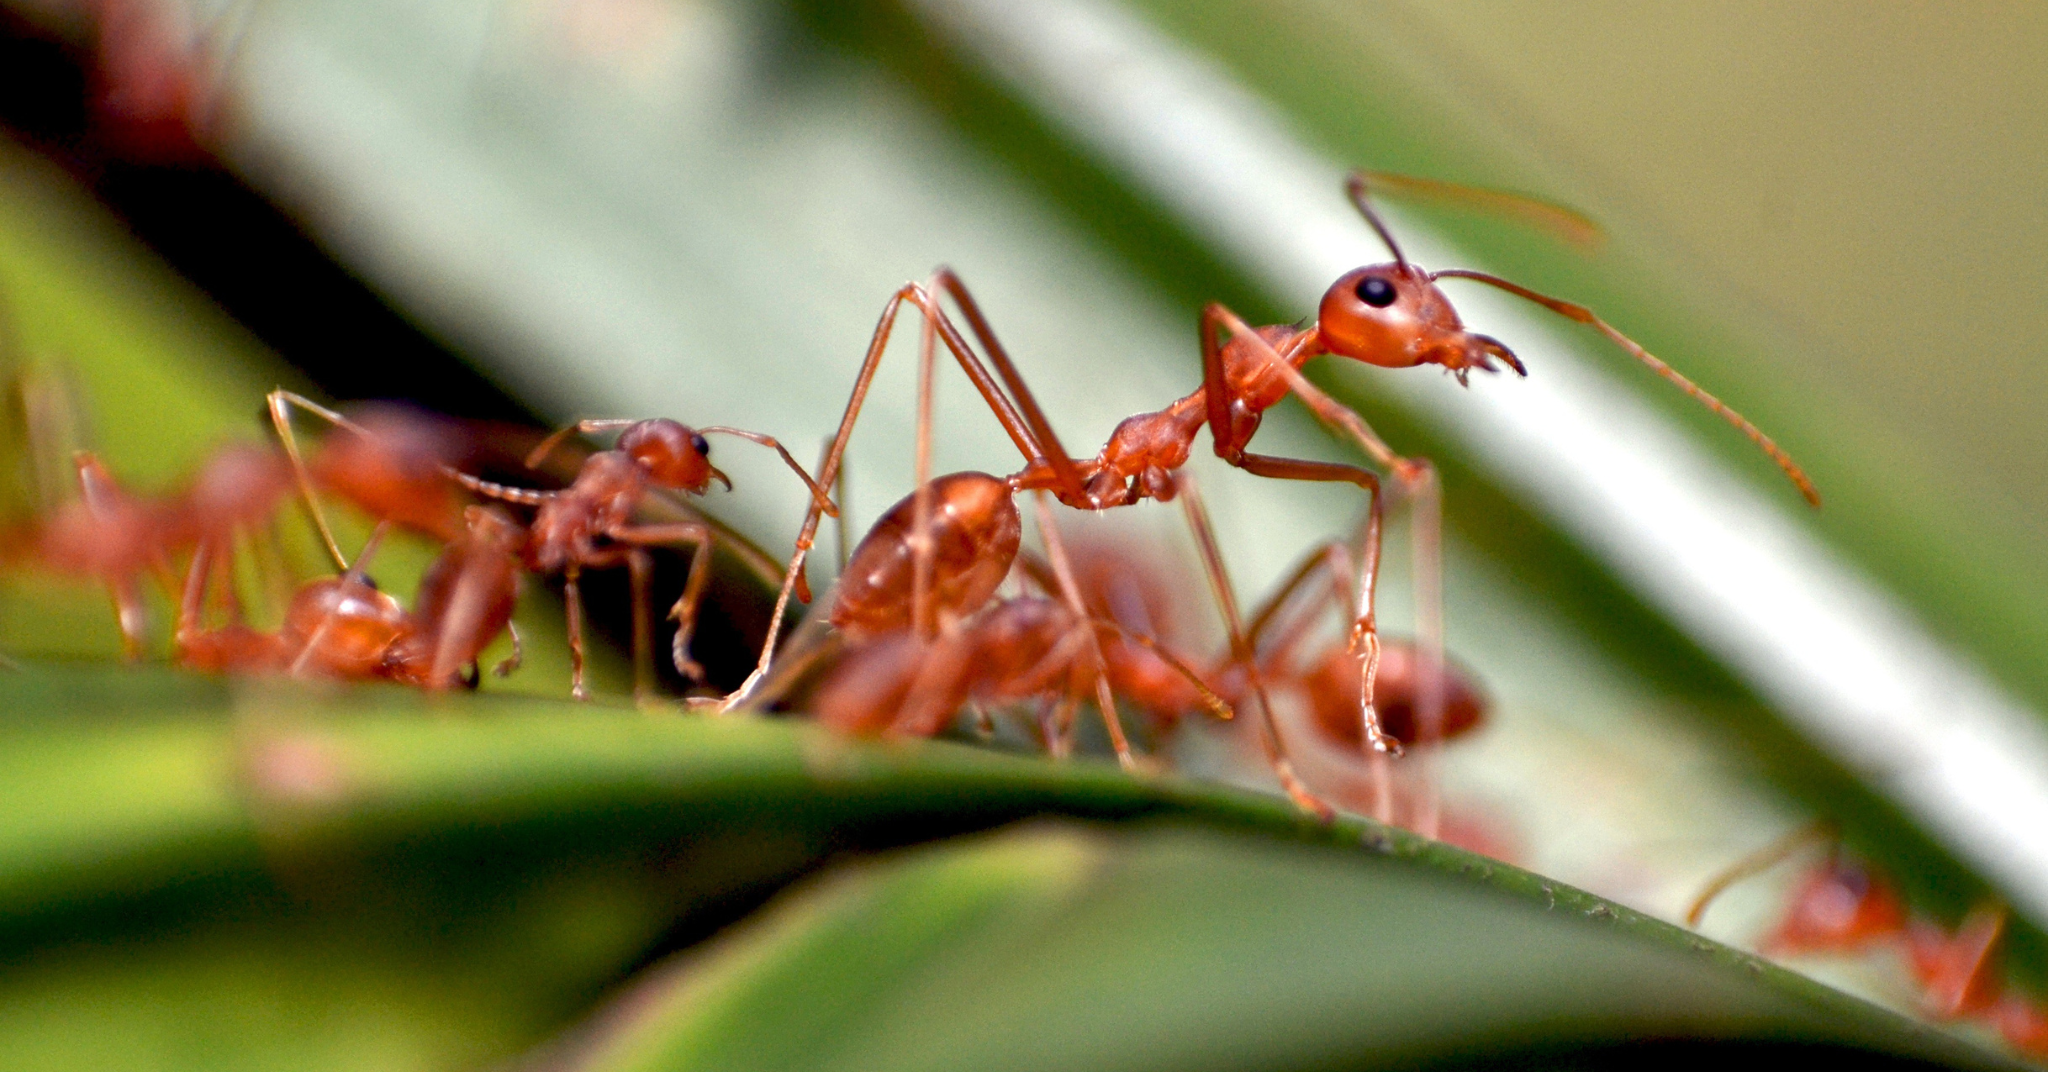 Common Ants and How to Identify Them